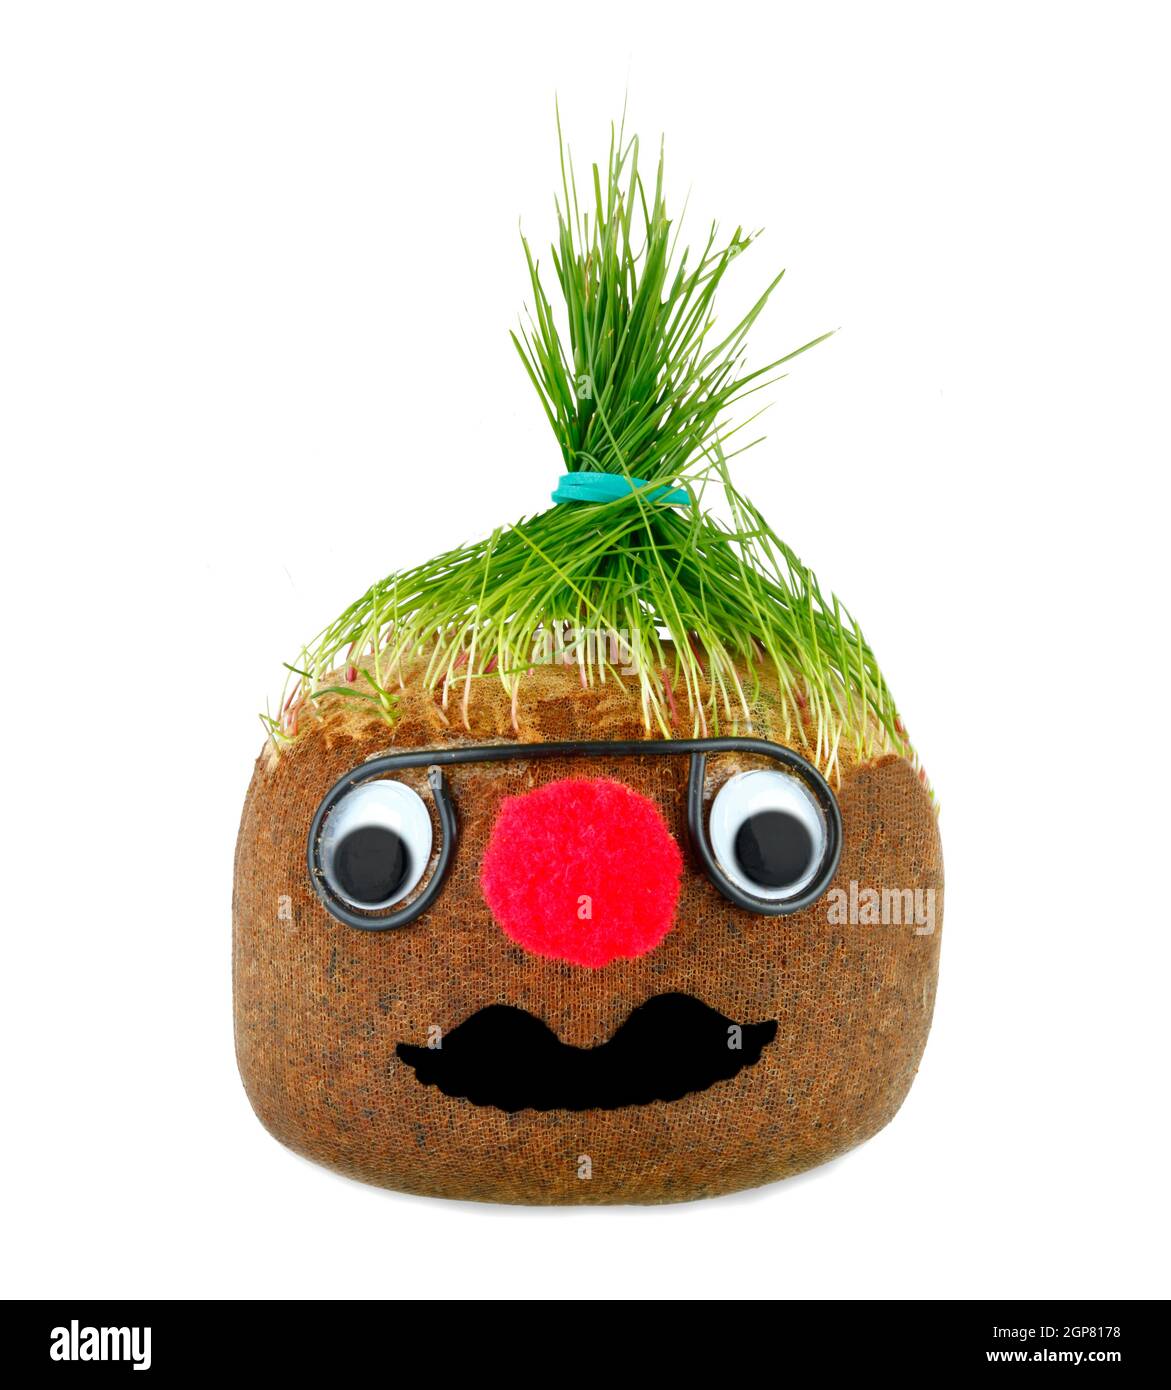 Puppet with ground wheat sprouts for hair on white Stock Photo - Alamy